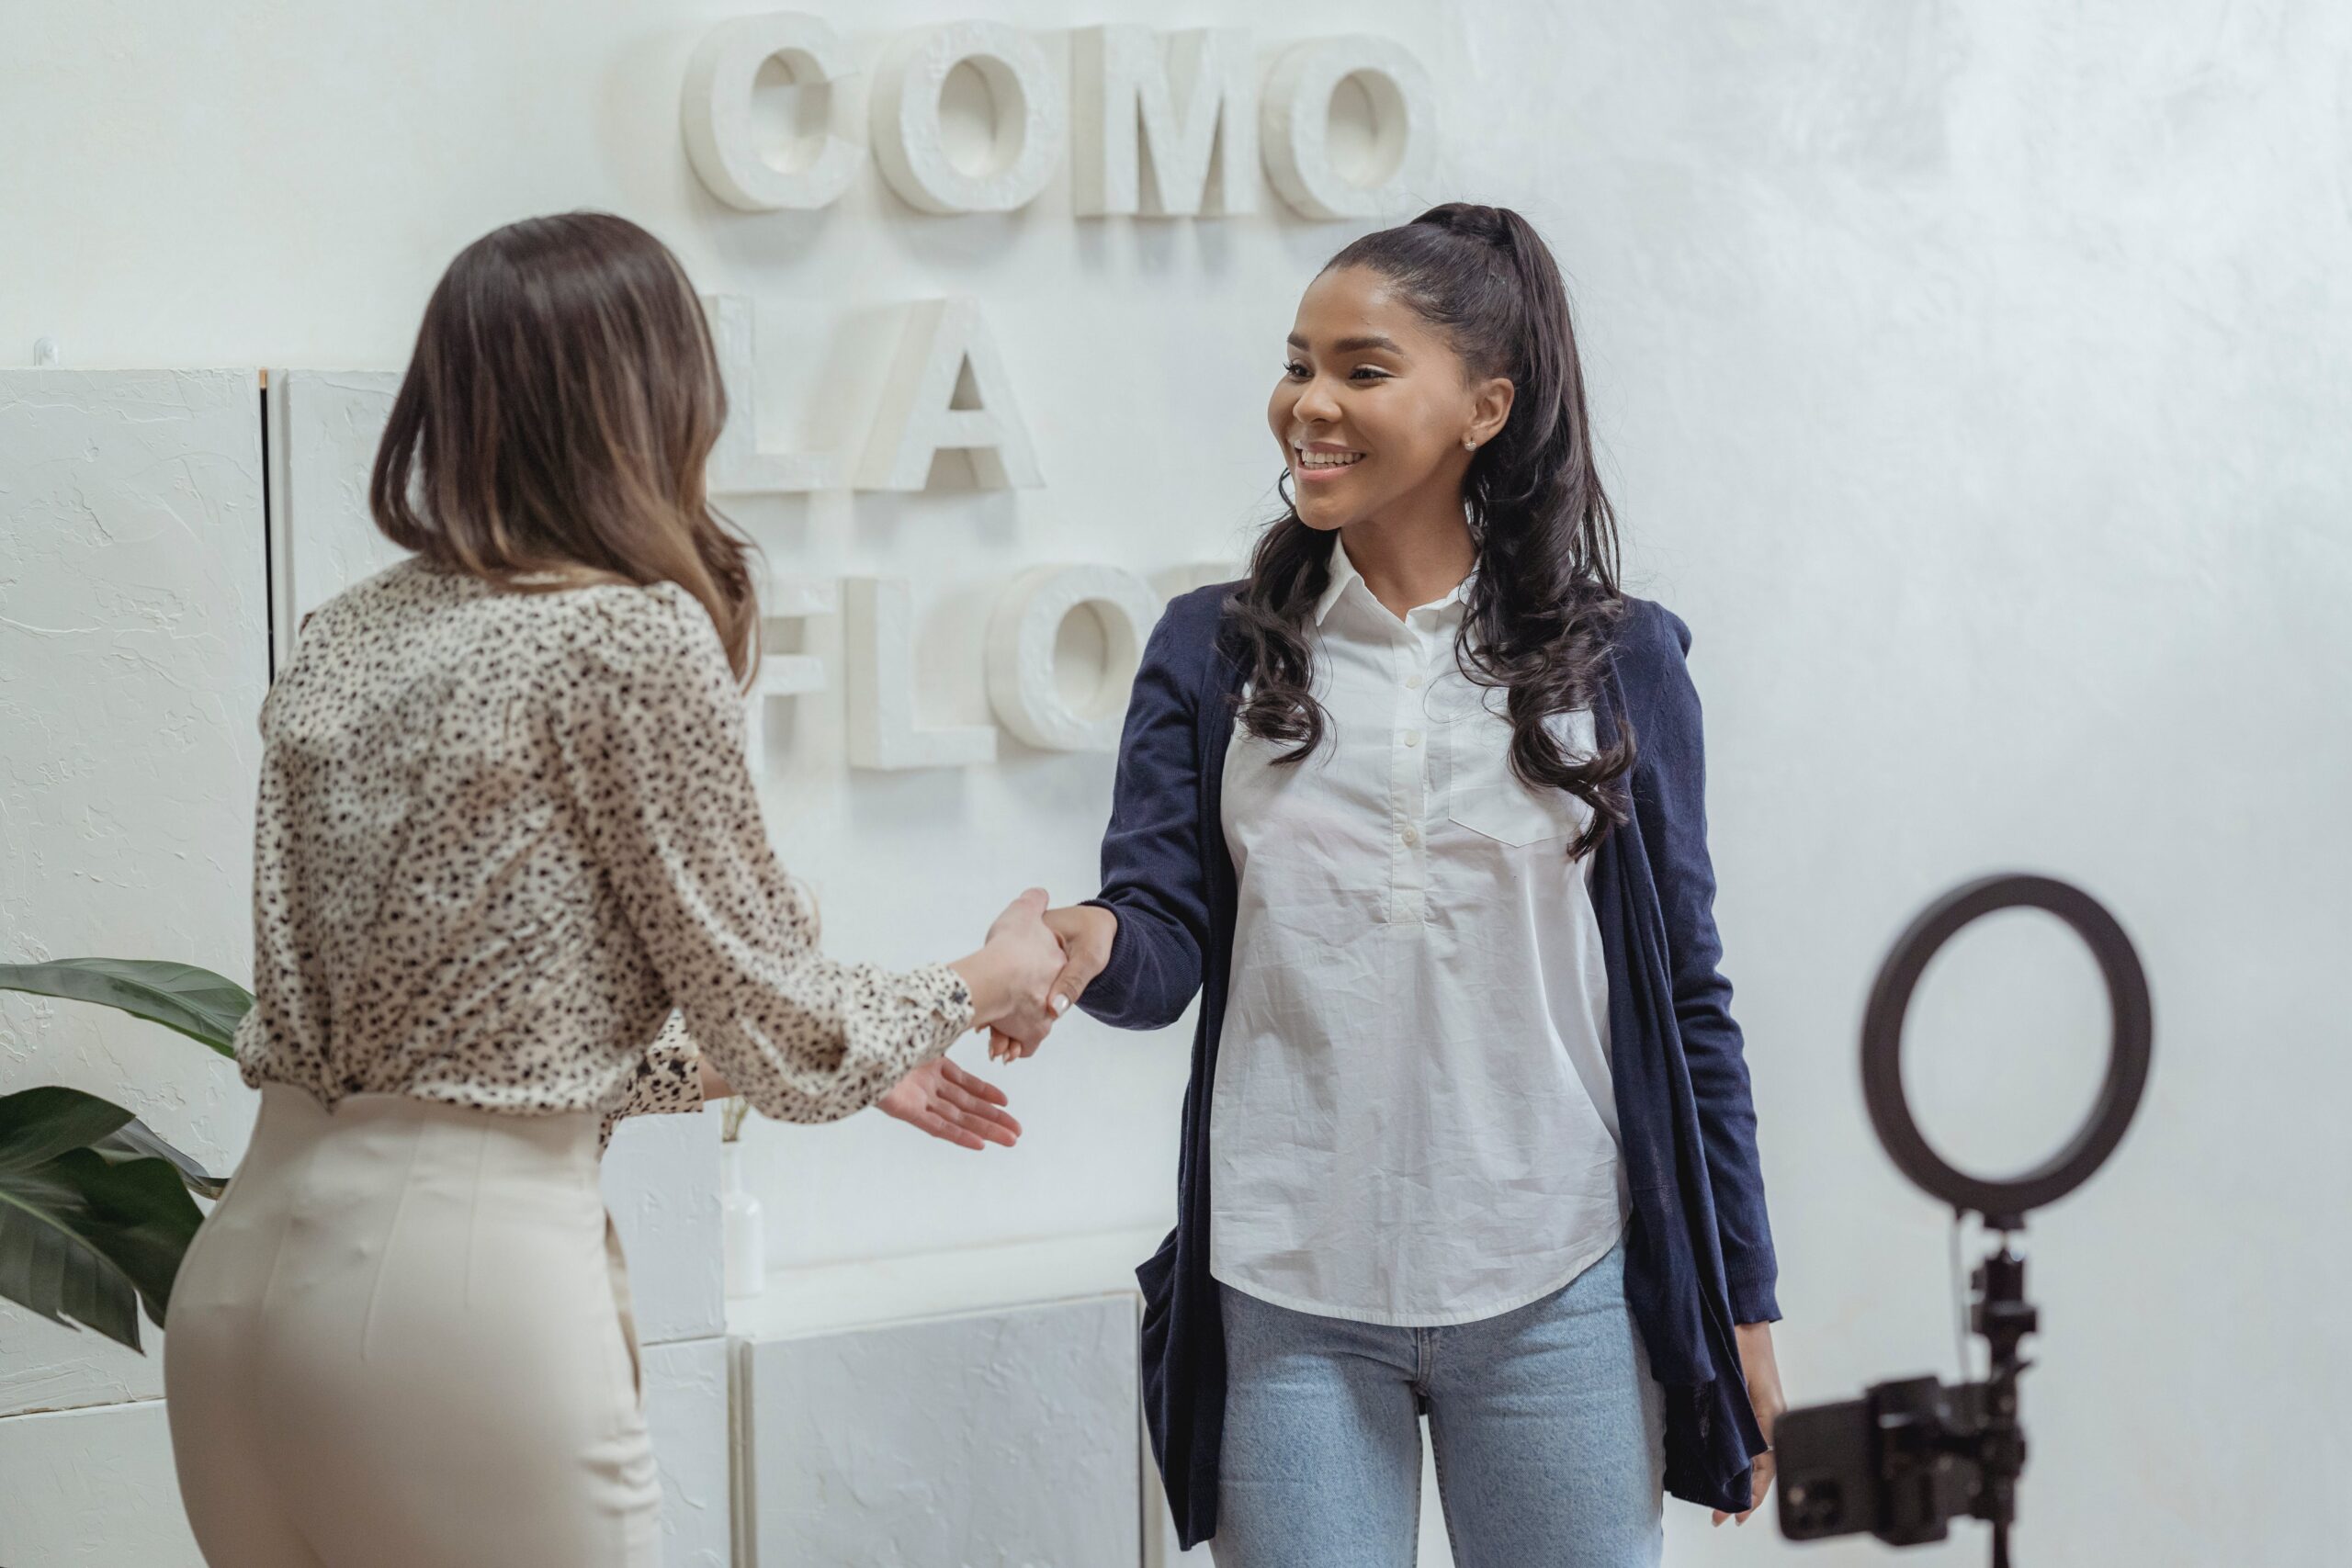 Two young career girls shaking hands and networking.